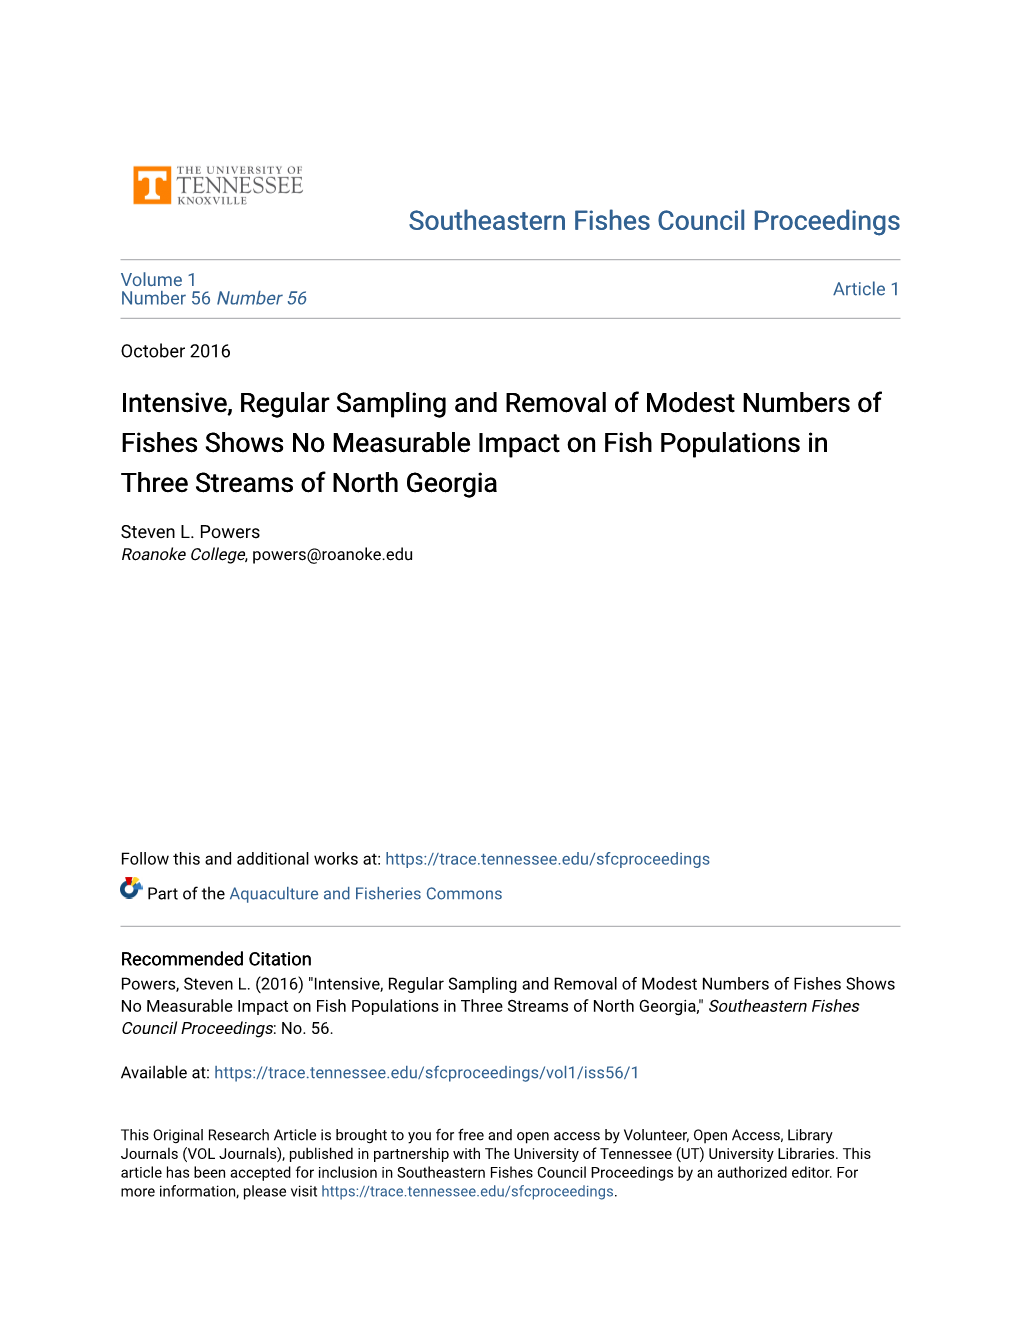 Intensive, Regular Sampling and Removal of Modest Numbers of Fishes Shows No Measurable Impact on Fish Populations in Three Streams of North Georgia